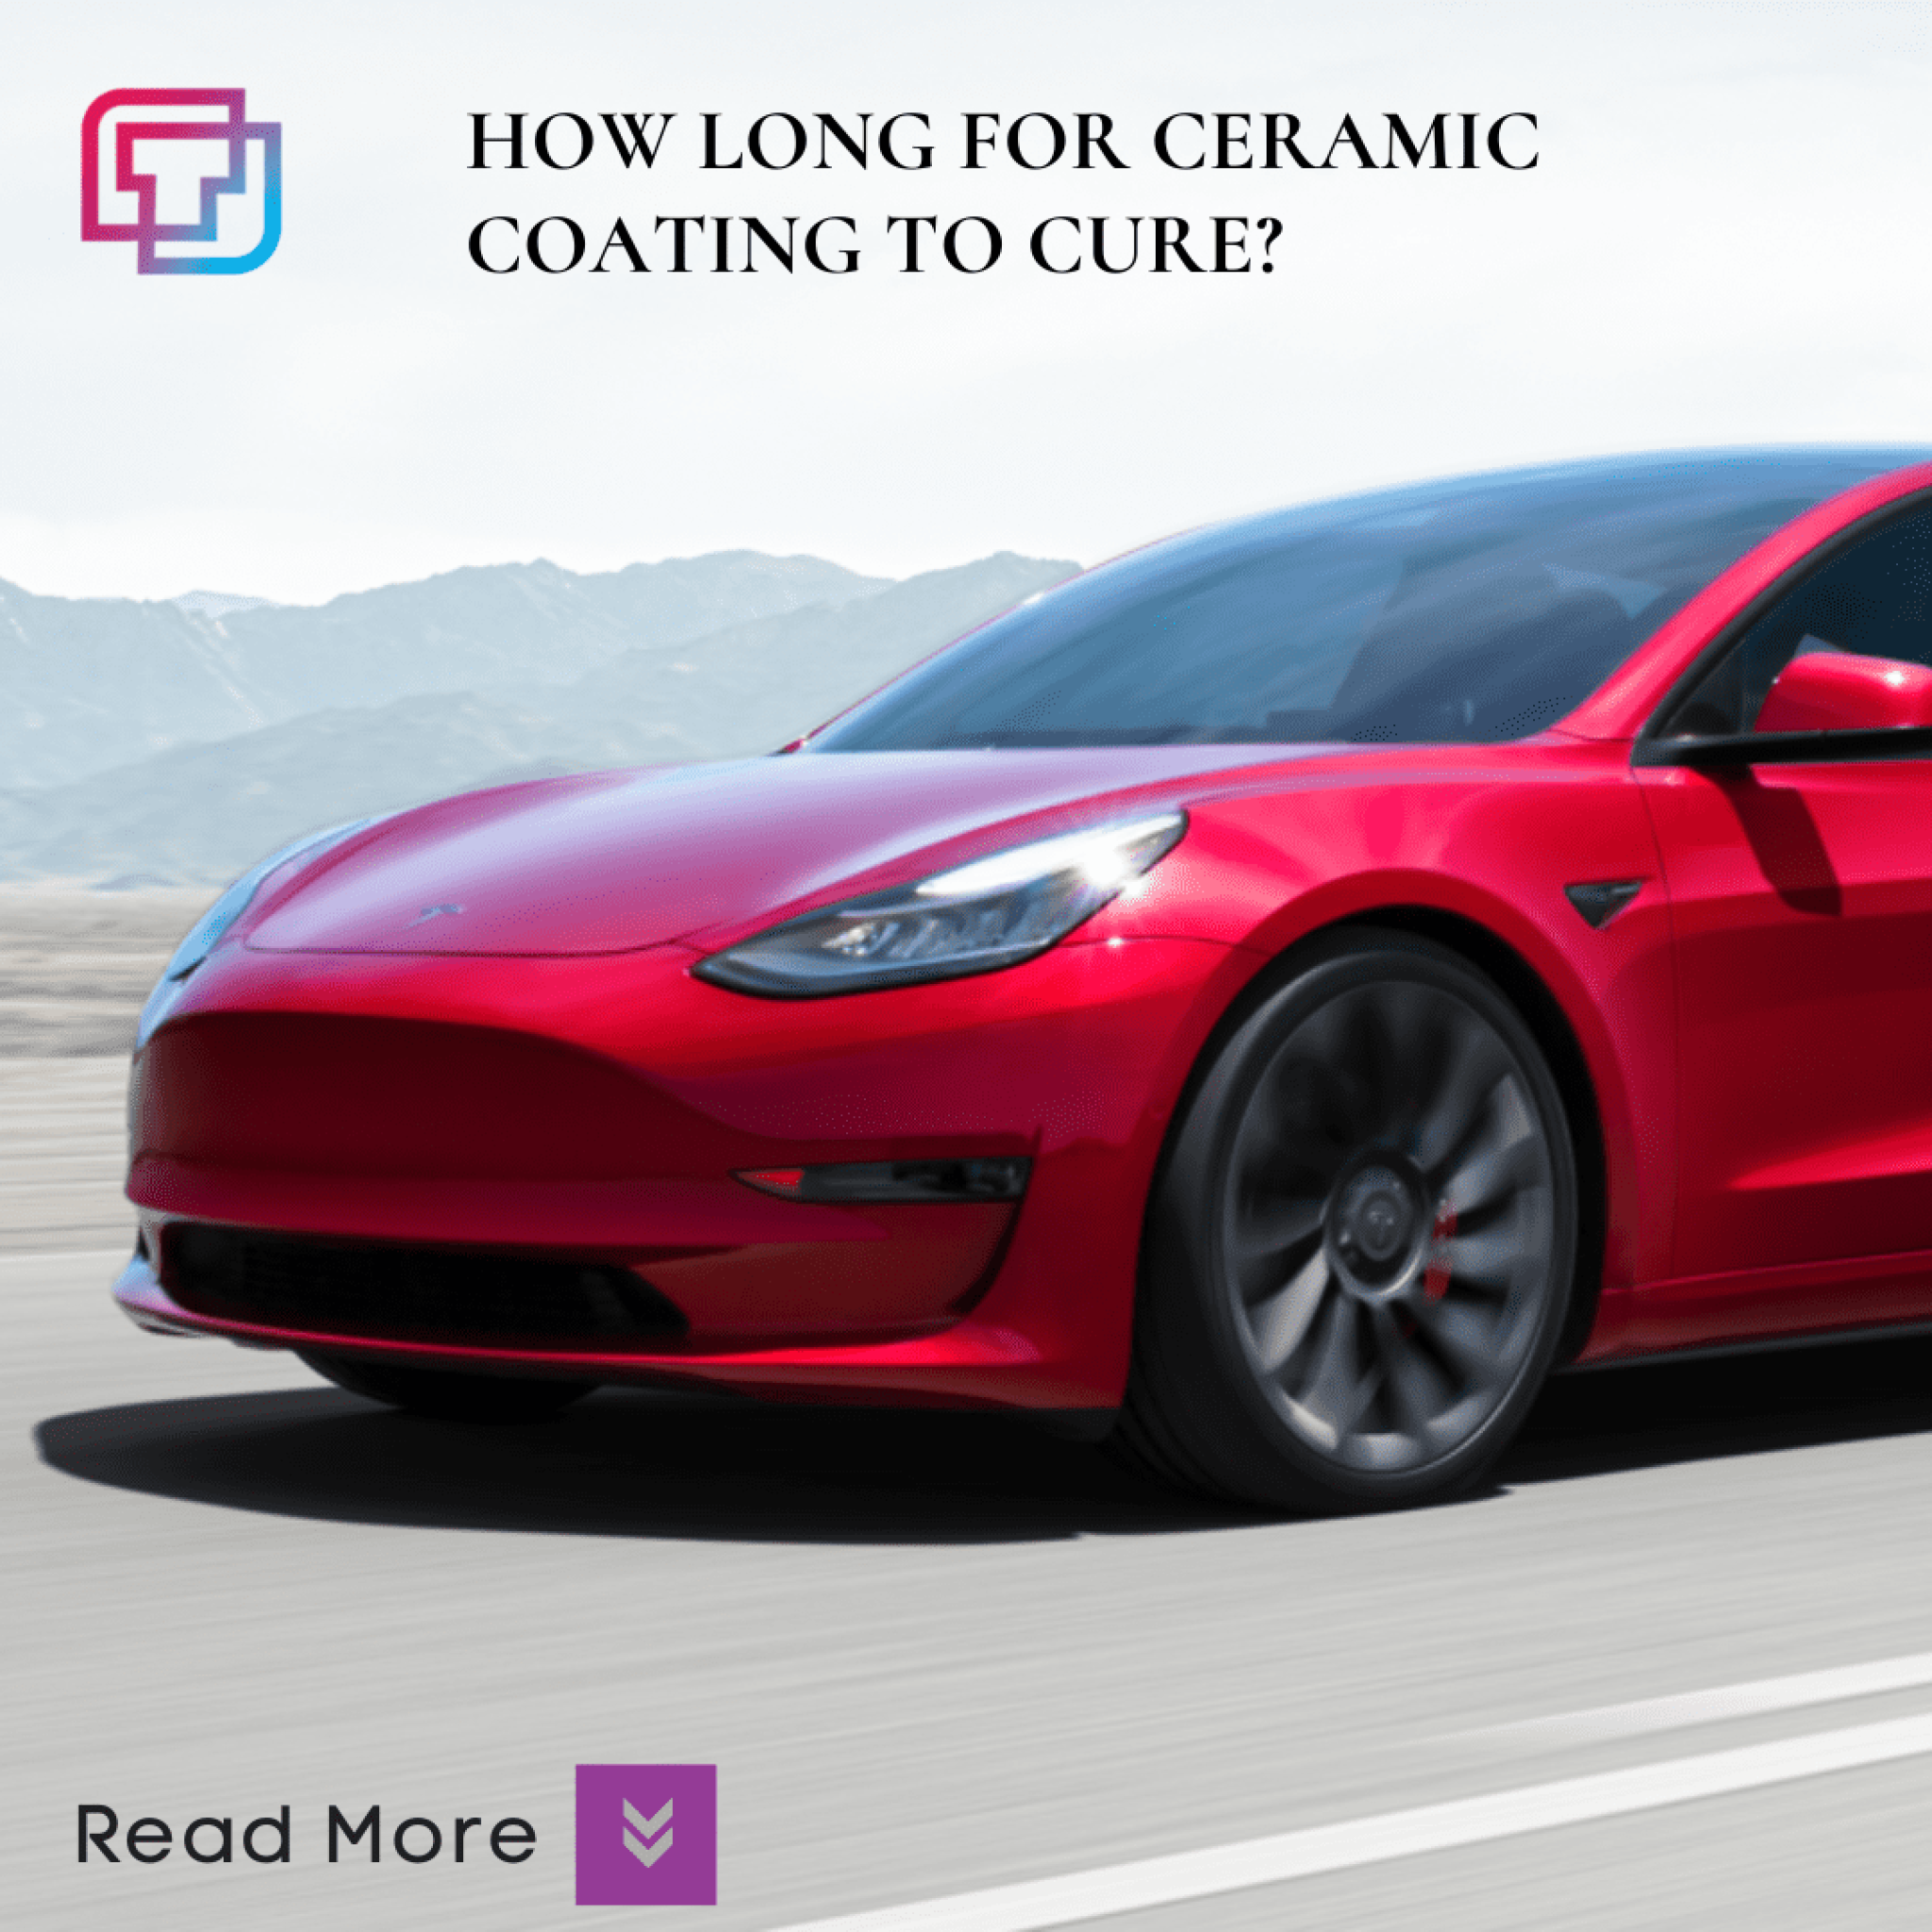 How long for ceramic coating to cure